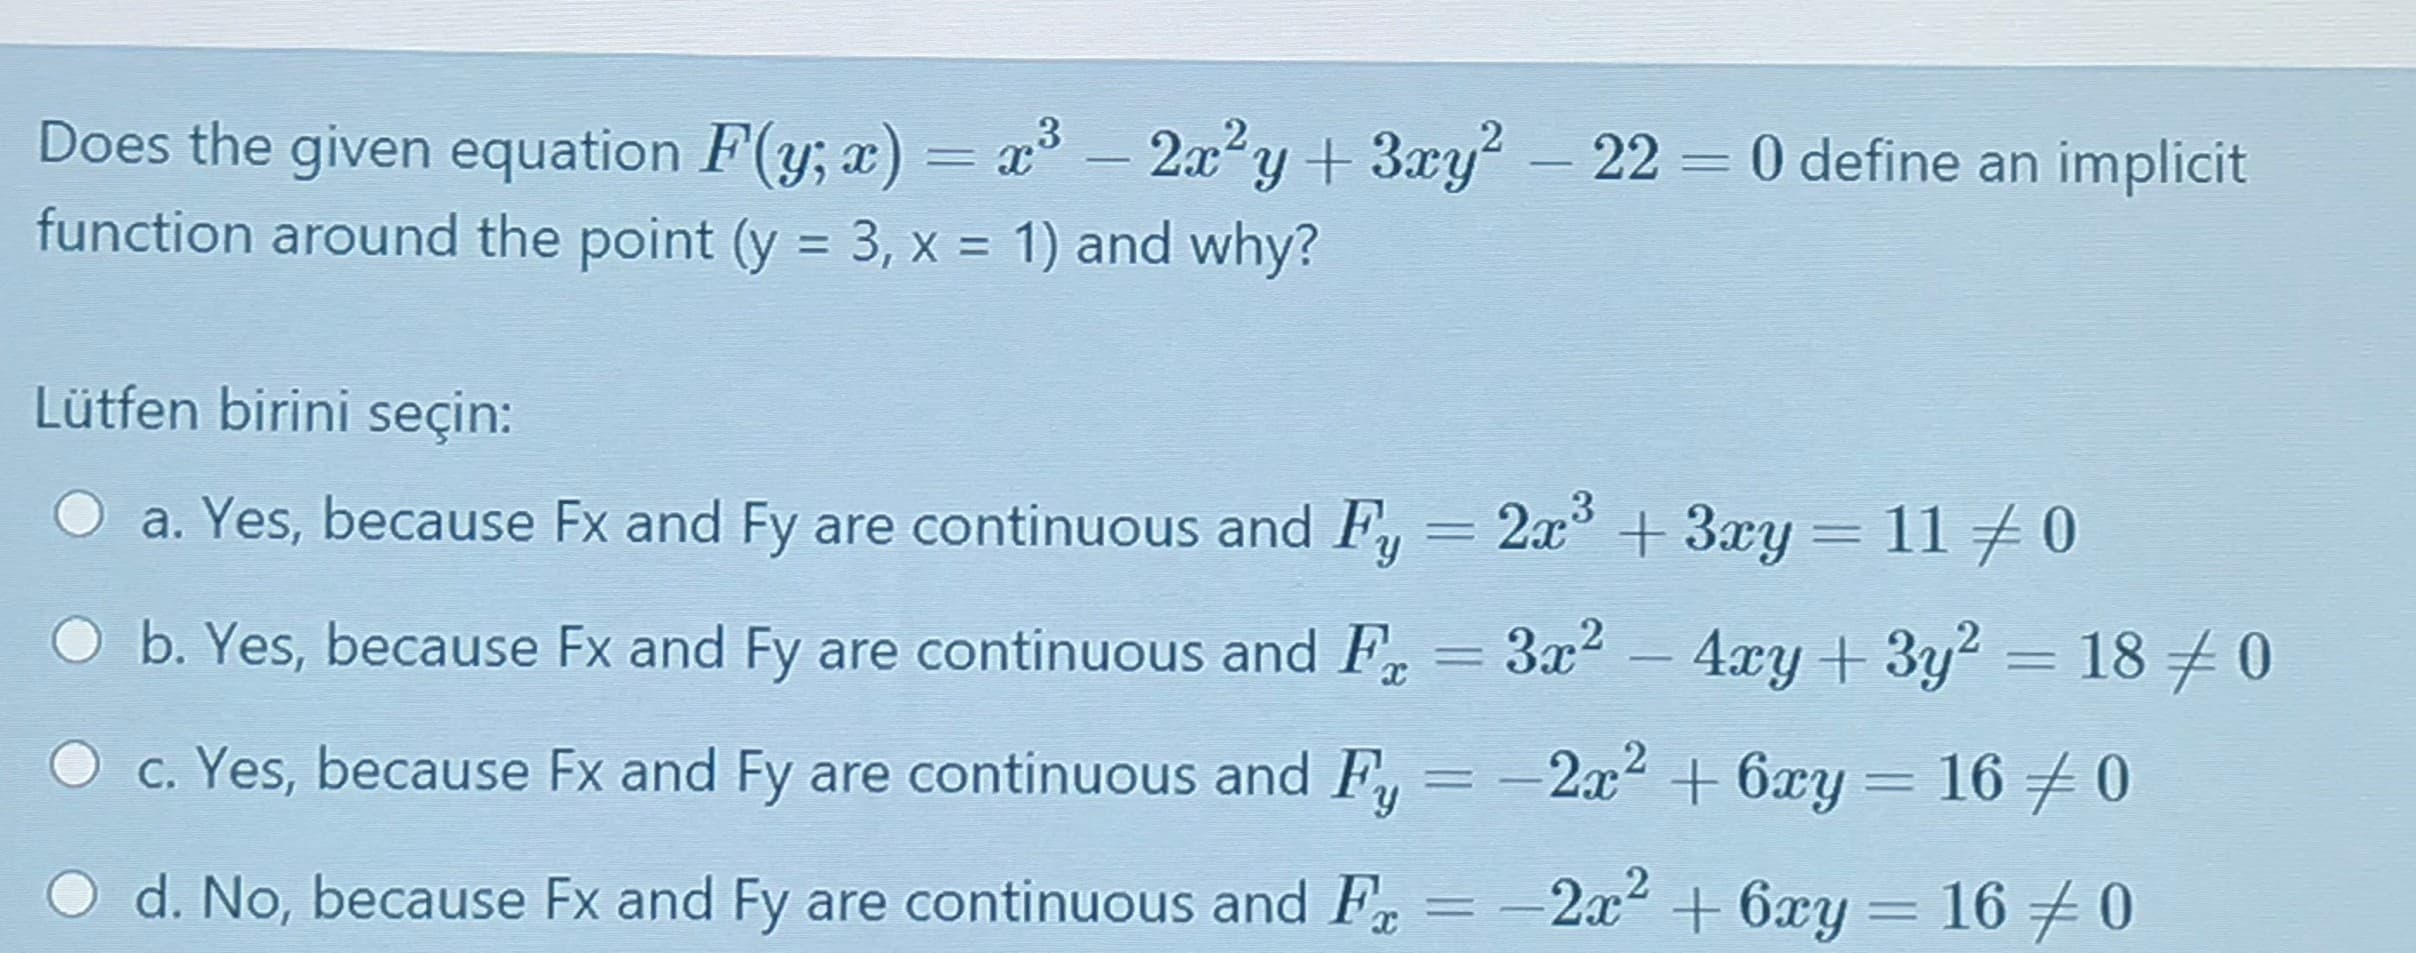 Does the given equation F(y; x) = x° - 2a²y+ 3xy- 22 0 define an implicit
function around the point (y = 3, x = 1) and why?
Lütfen birini seçin:
a. Yes, because Fx and Fy are continuous and F, = 2x +3xy = 110
%3D
b. Yes, because Fx and Fy are continuous and F, = 3x2 - 4xy + 3y2 = 18
c. Yes, because Fx and Fy are continuous and F, = -2x2 + 6xy = 16 0
%3D
d. No, because Fx and Fy are continuous and F, = -2x2 + 6xy = 16 0
%3D
